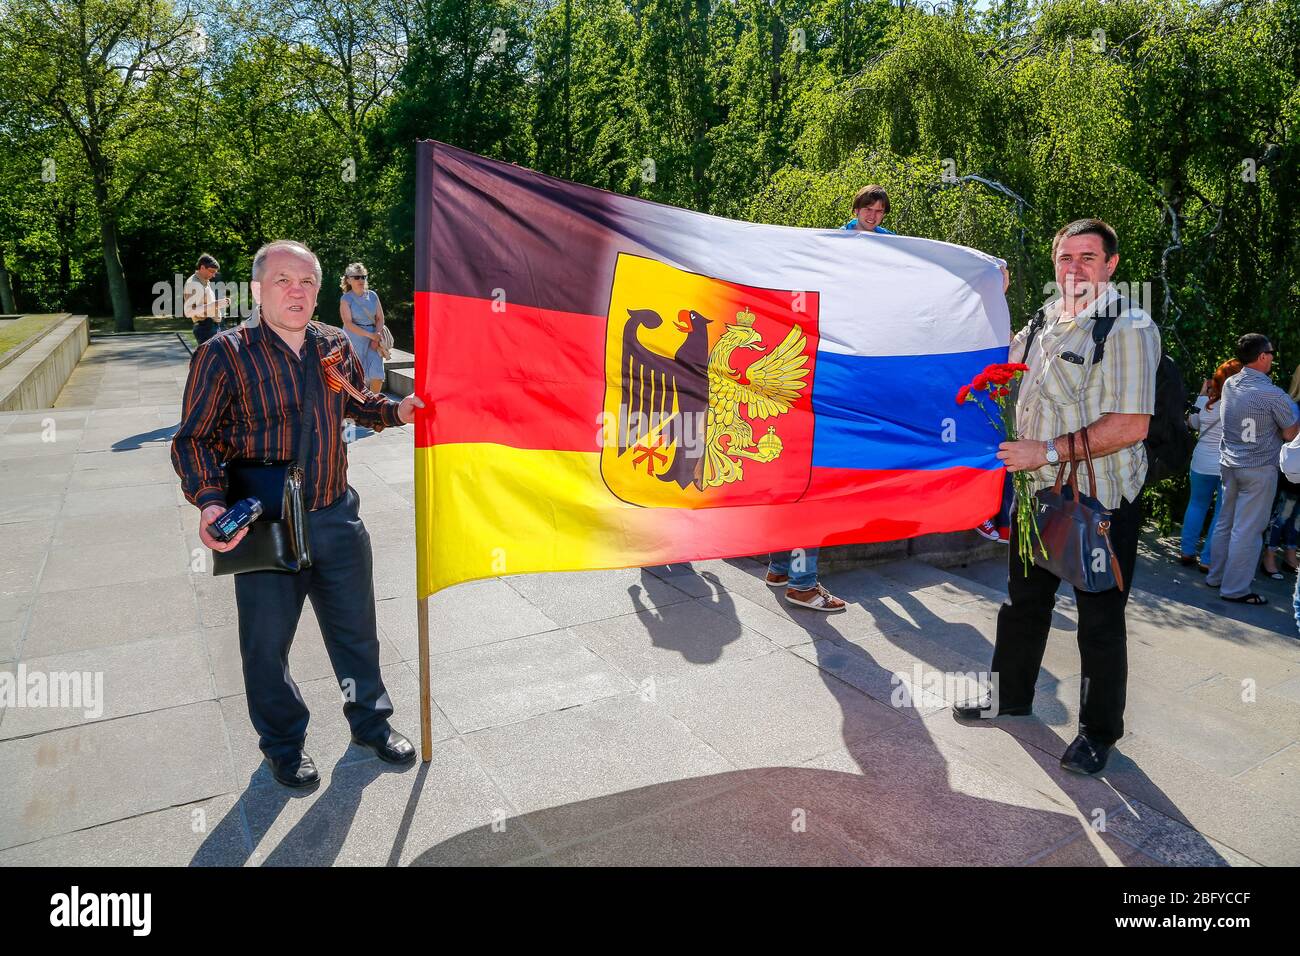 May 9, 2016, Berlin, at the Soviet War Memorial in Treptower Park (Treptower War Memorial), a memorial and at the same time a military cemetery, numerous Russians and German-Russians with many colorful flags commemorate the 71st day of victory at the end of the Second World War. The memorial was erected in Germany in 1949 on the instructions of the Soviet military administration to honor the soldiers of the Red Army who died in World War II. Over 7000 of the soldiers who died in the Schlaughs around Berlin are buried here. Visitors with a flag that half represents the national flag of the Fede Stock Photo